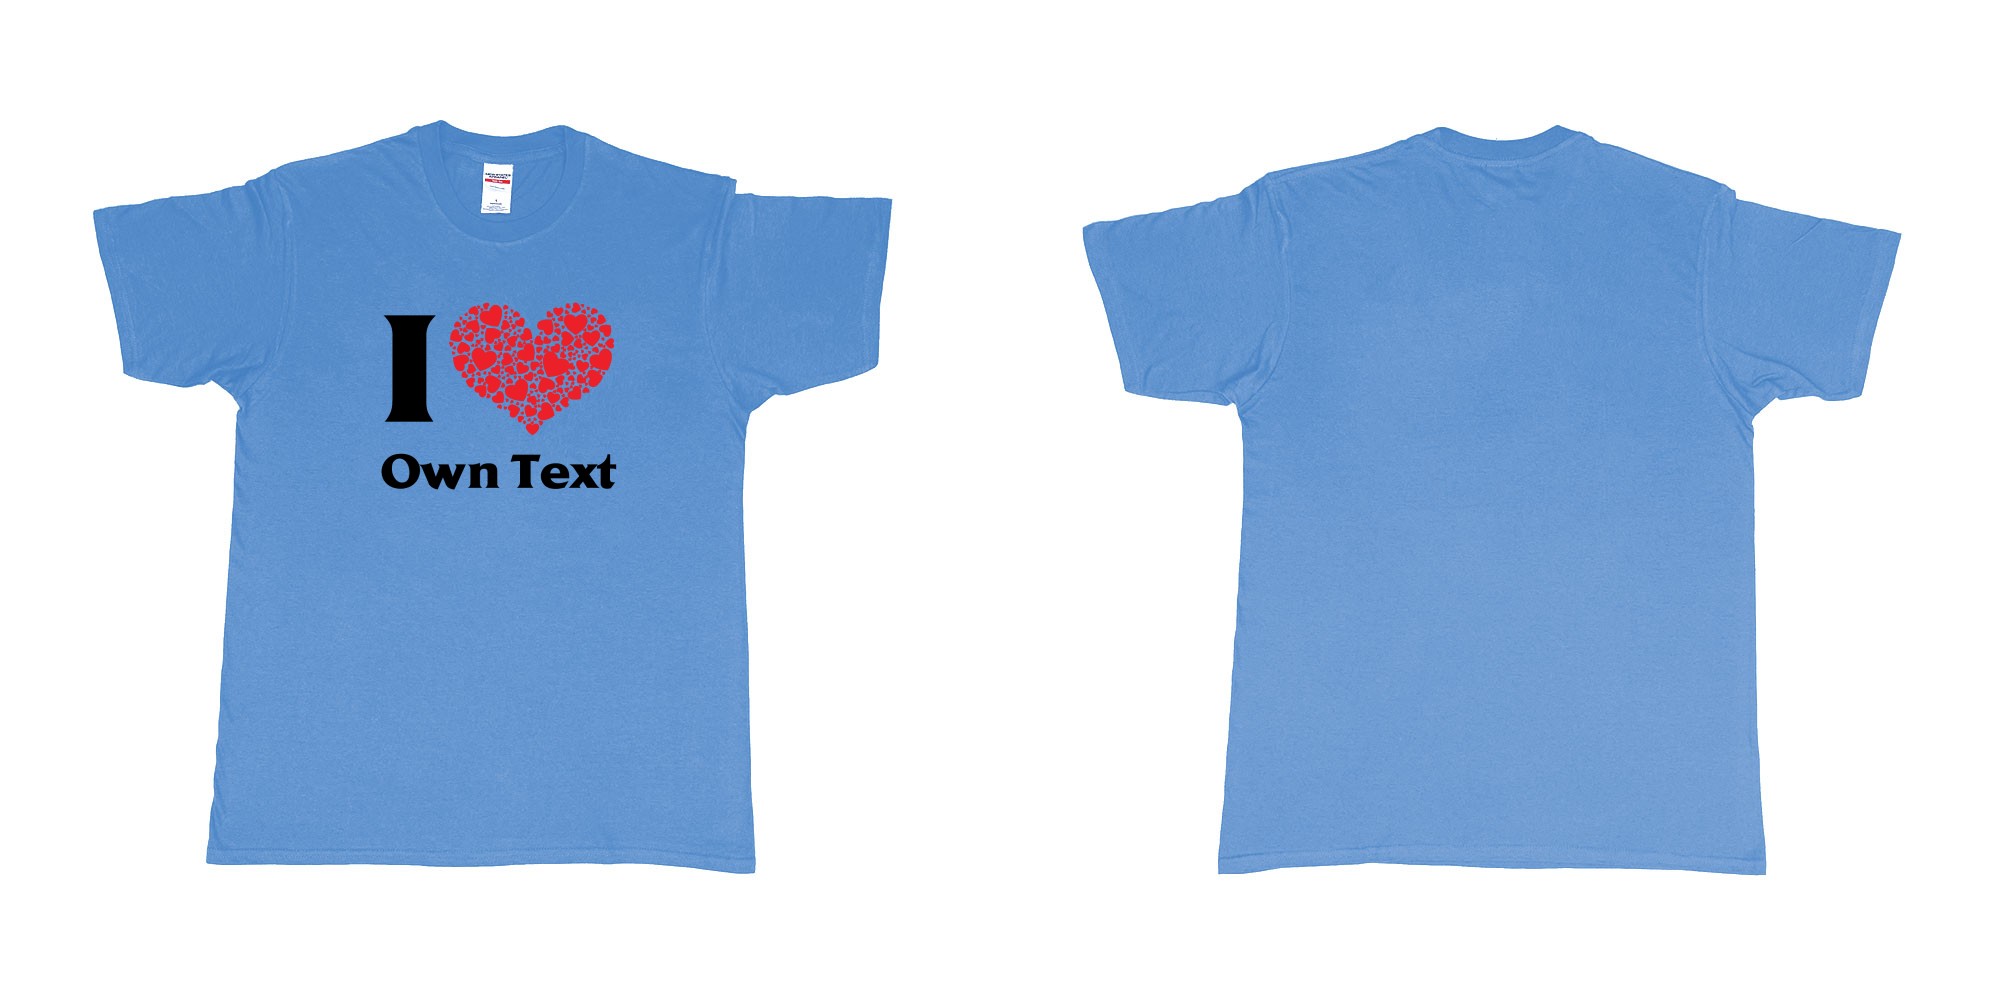 Custom tshirt design i loveheart custom own text bali tees mom dad beach kuta in fabric color carolina-blue choice your own text made in Bali by The Pirate Way